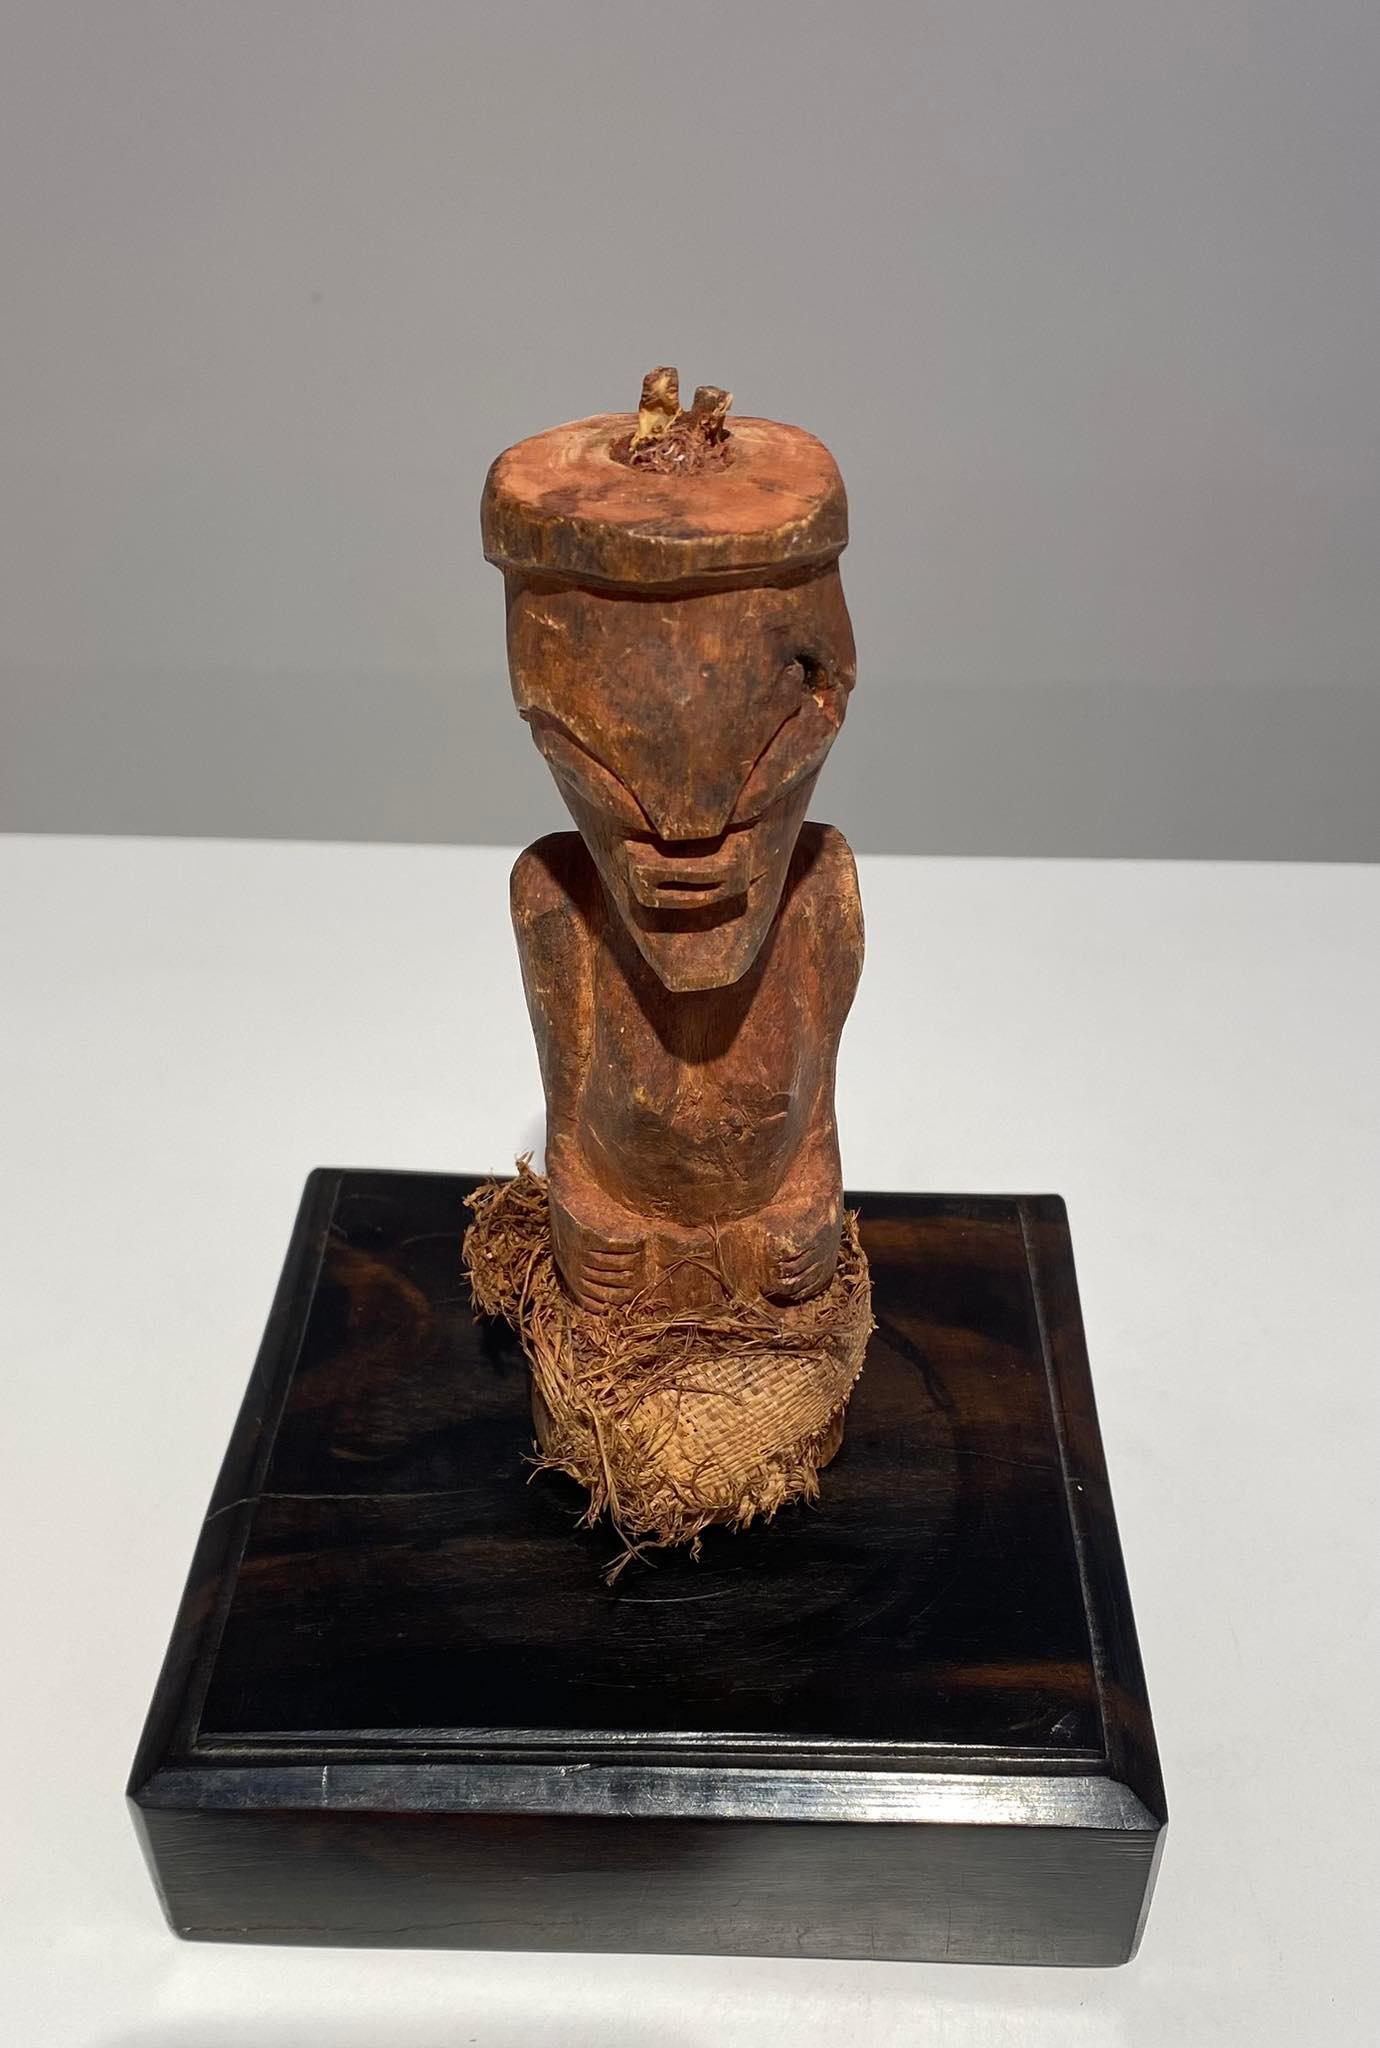 Old / Authentic And Rare Nkishi Statue Songye / Dream People - Dr Congo African Art
Period: Late 19th century
Height: 17 cm
Very beautiful red patina
This type of powerful fetish from the Songye tribe is quite unusual and rare when you look at the